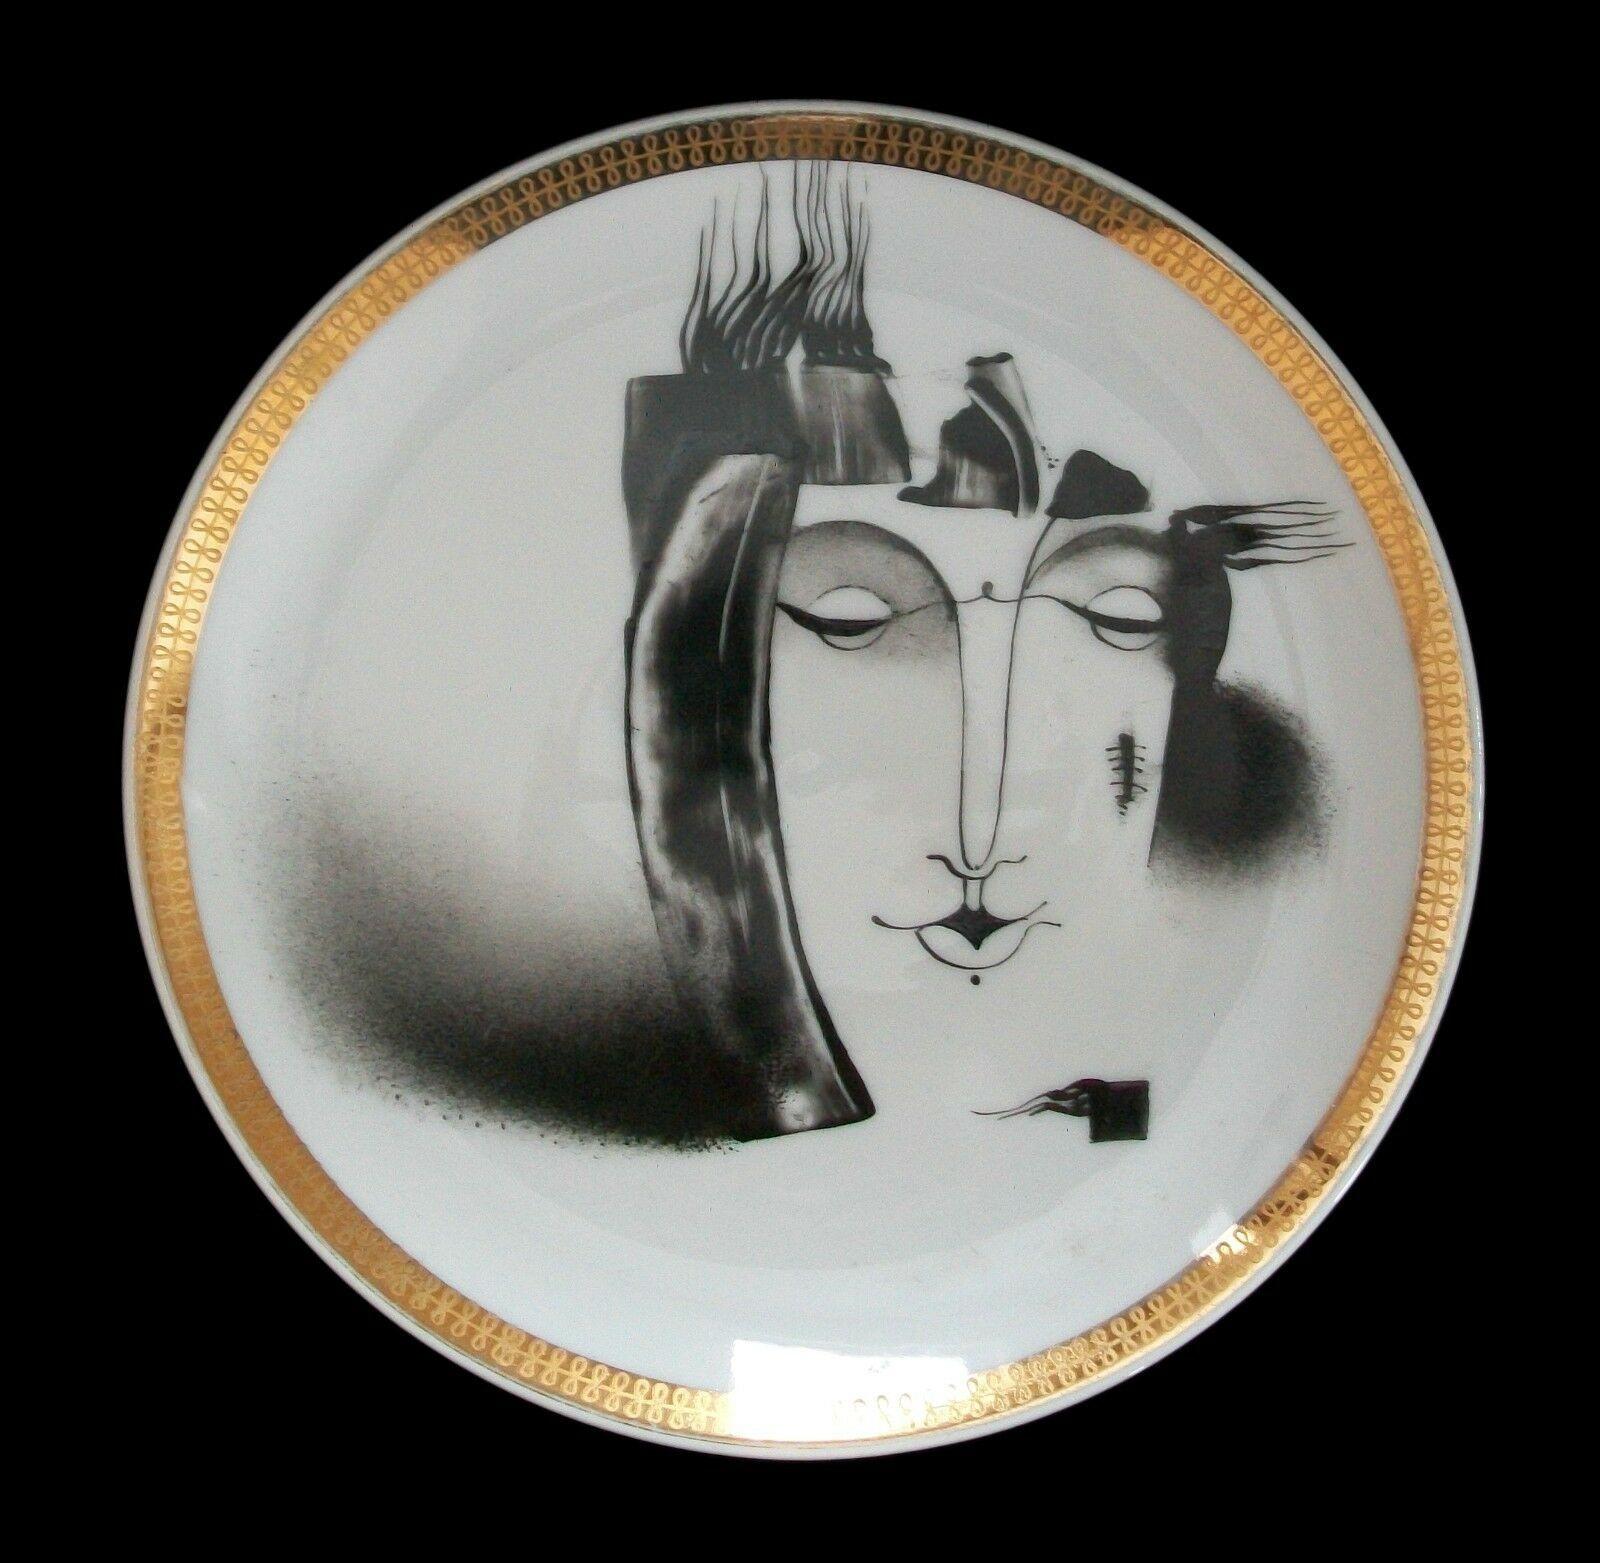 Helga Ingeborga Melnbarde - 'Portrait' - Important contemporary European studio ceramic plate - hand painted on a Czech porcelain 'blank' - featuring an Expressionist female portrait with scar and 'infinity' gilt border - signed and dated verso -